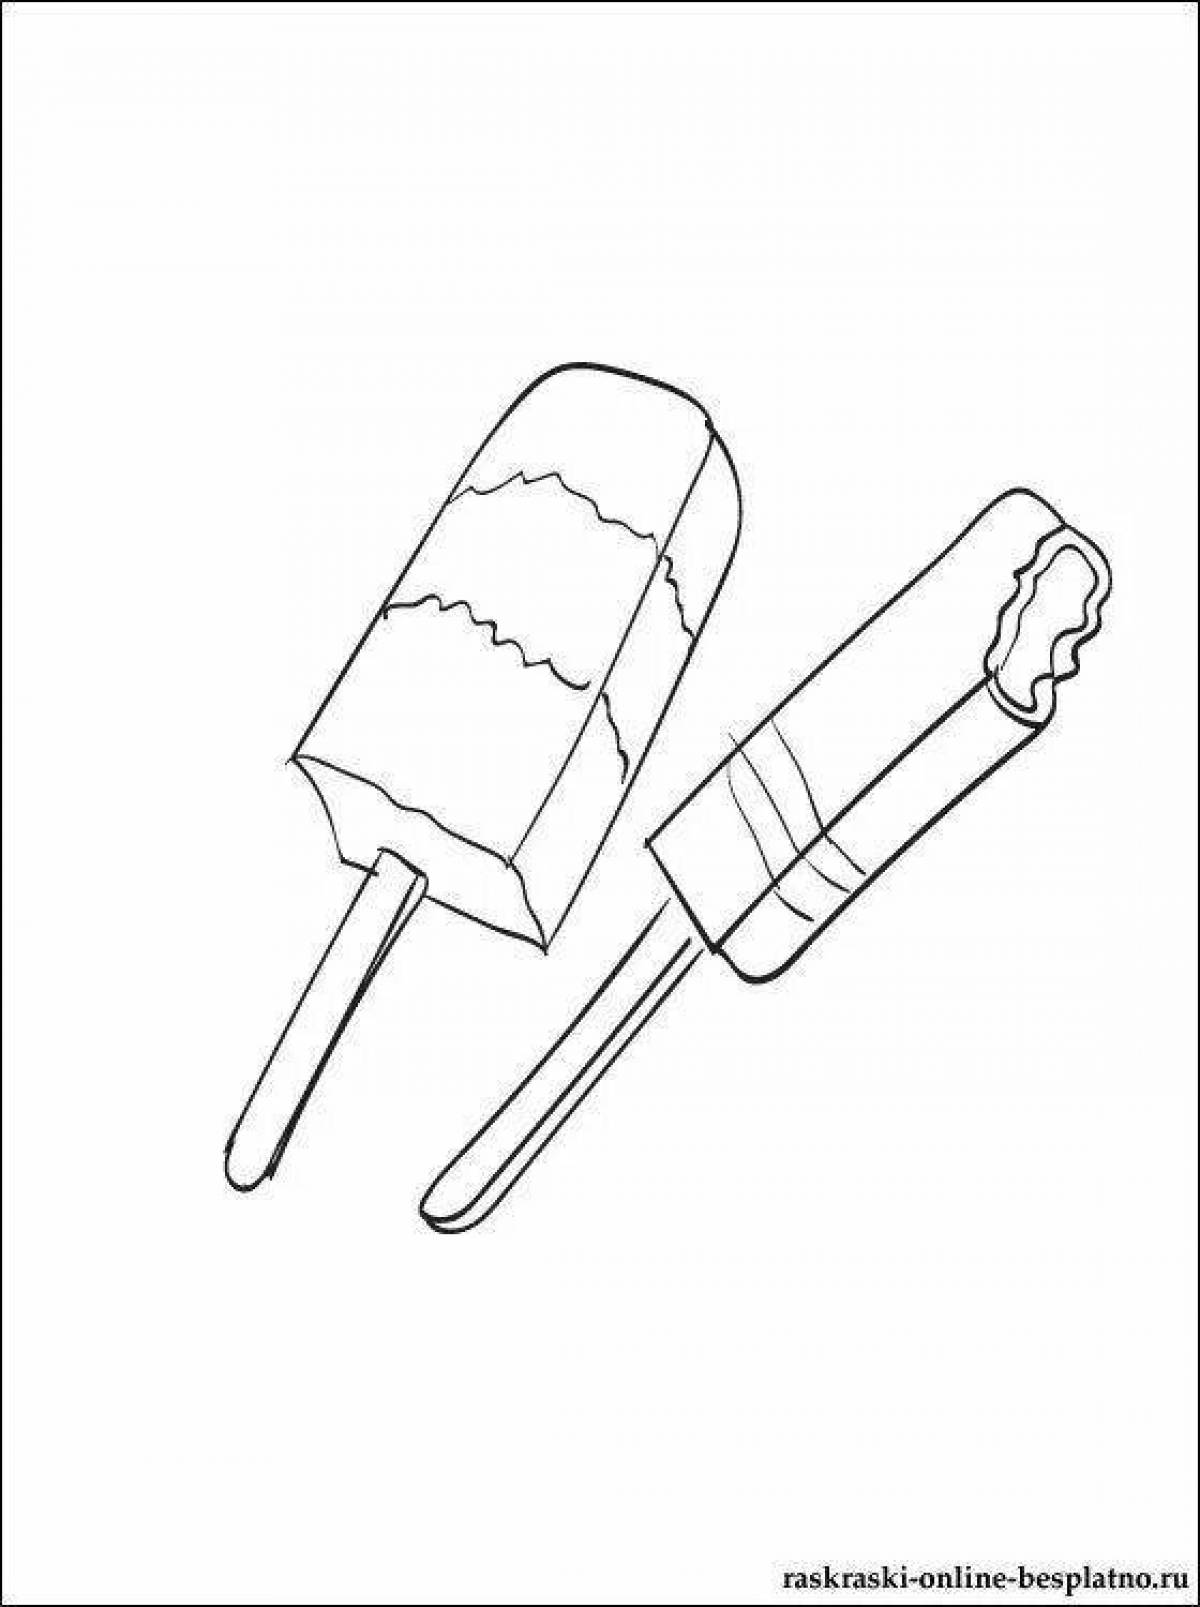 Colorful popsicle coloring book